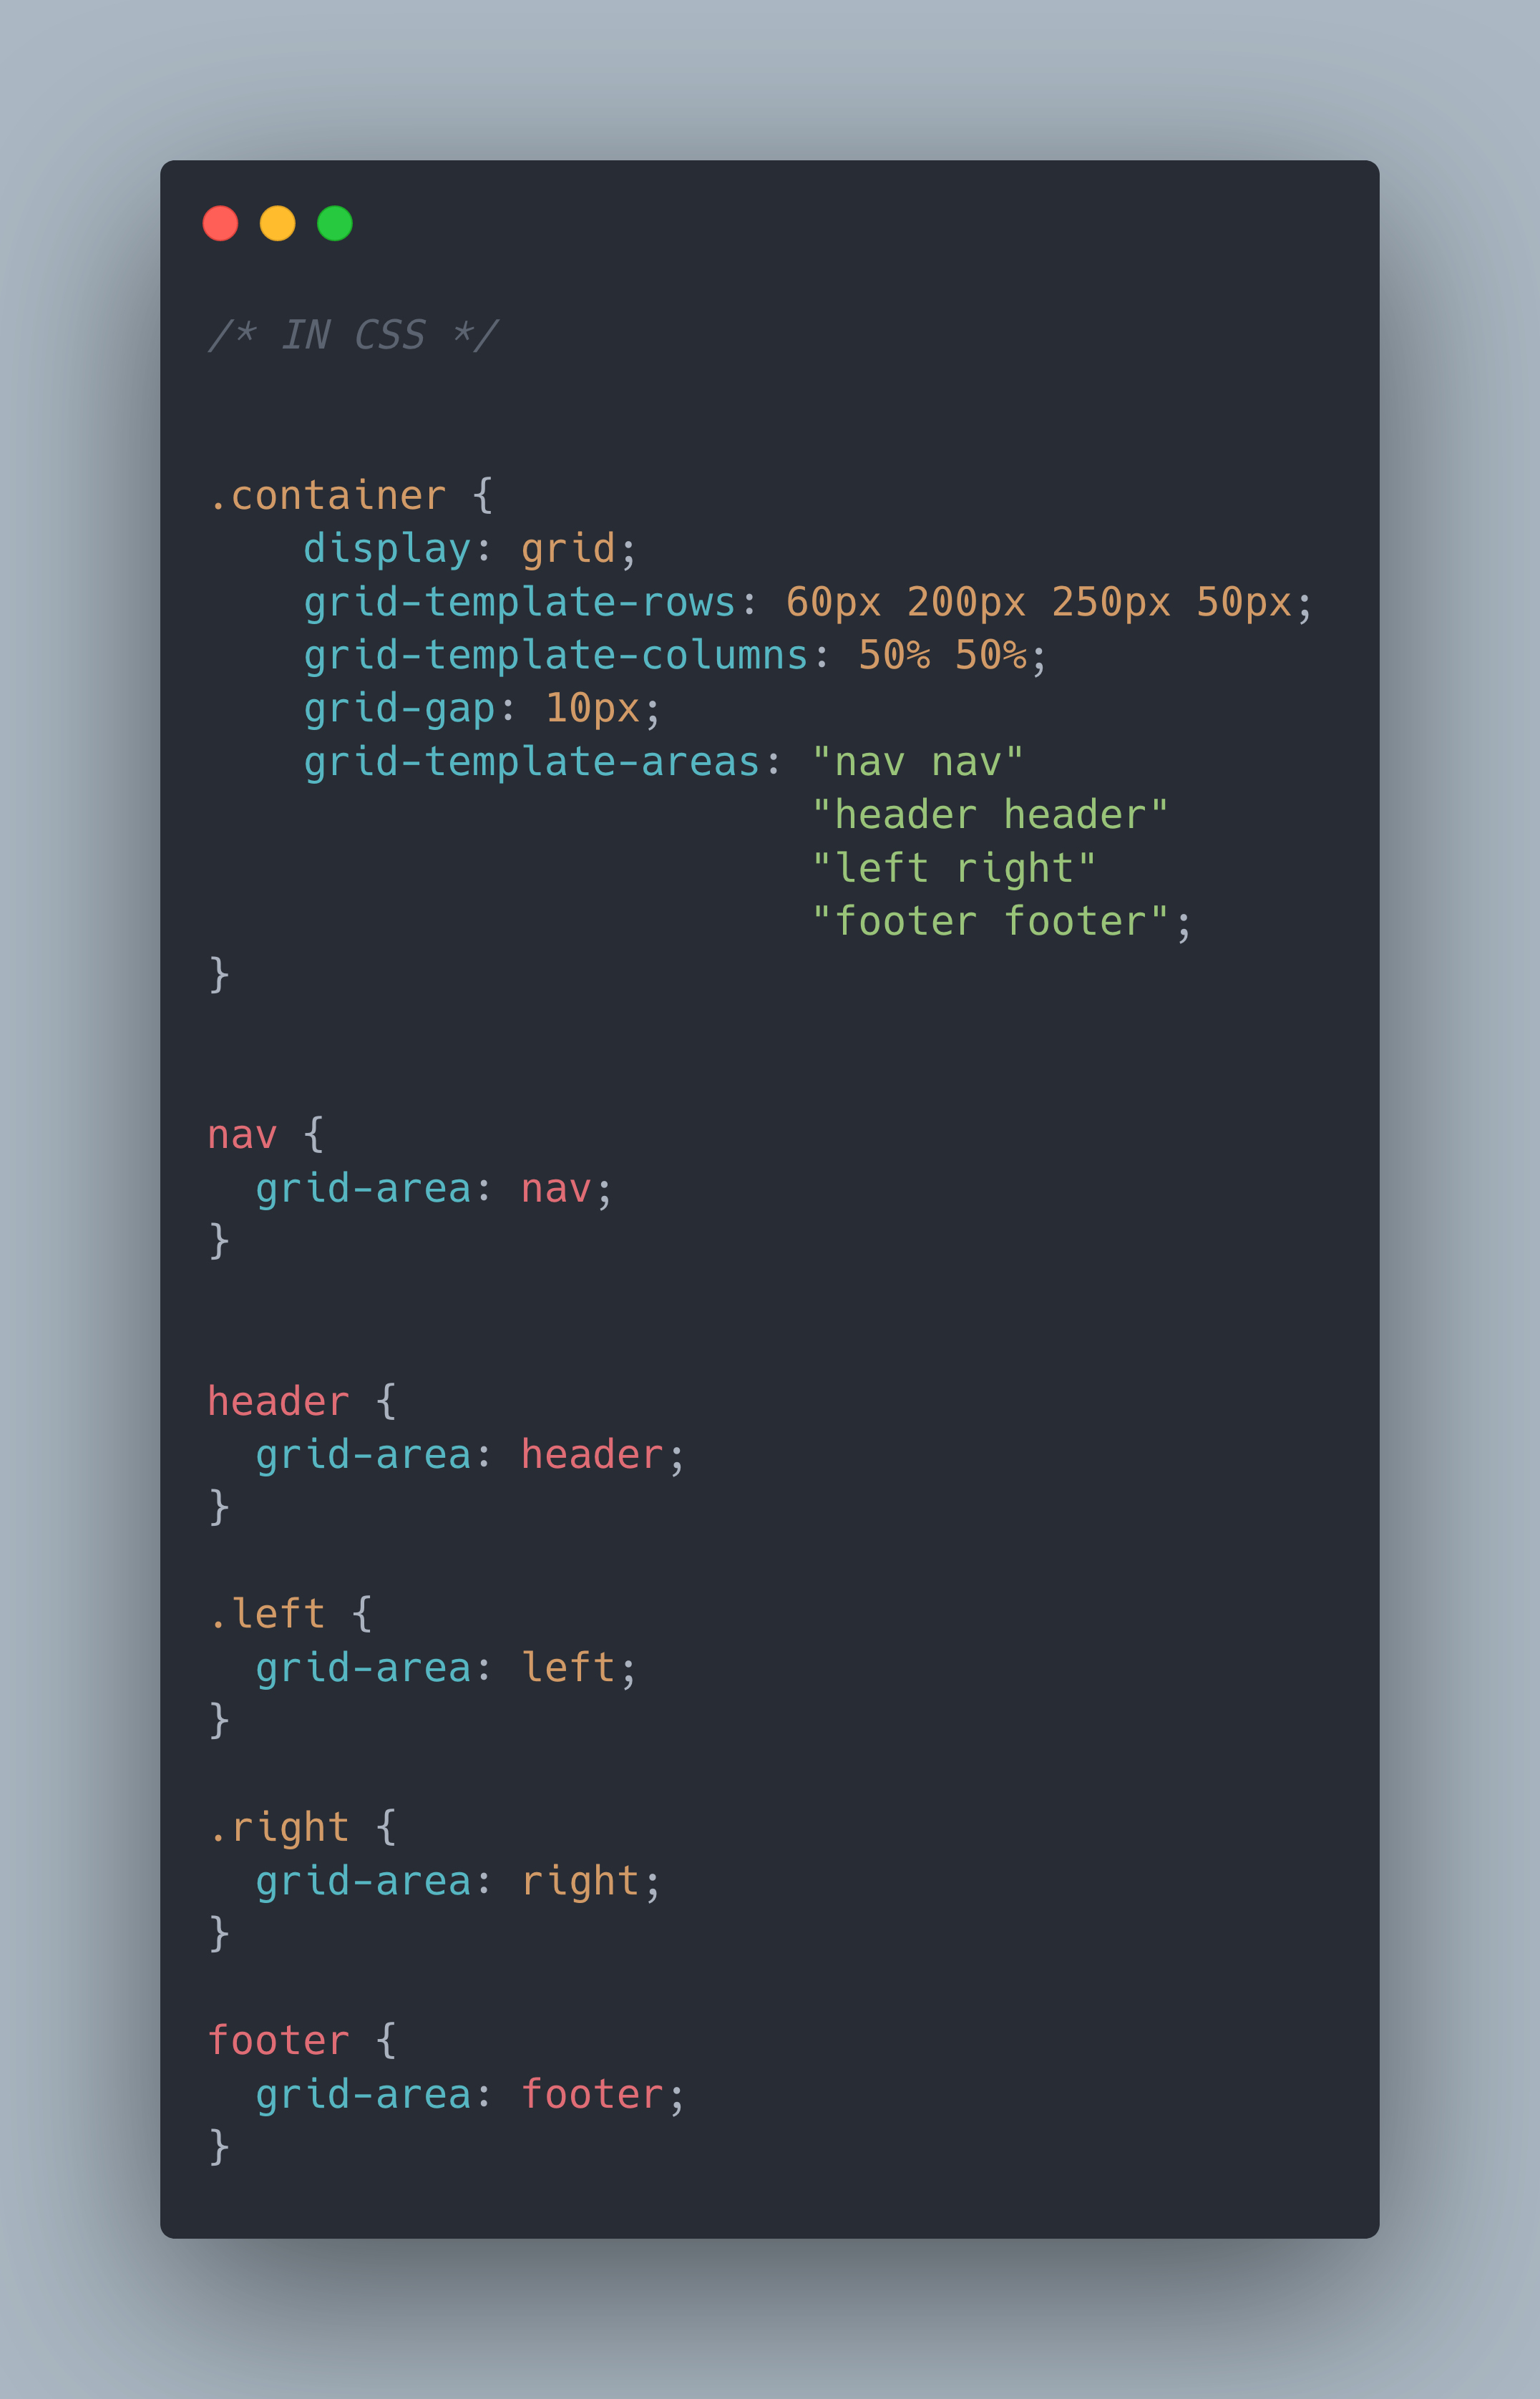 Css grid-template-areas code example